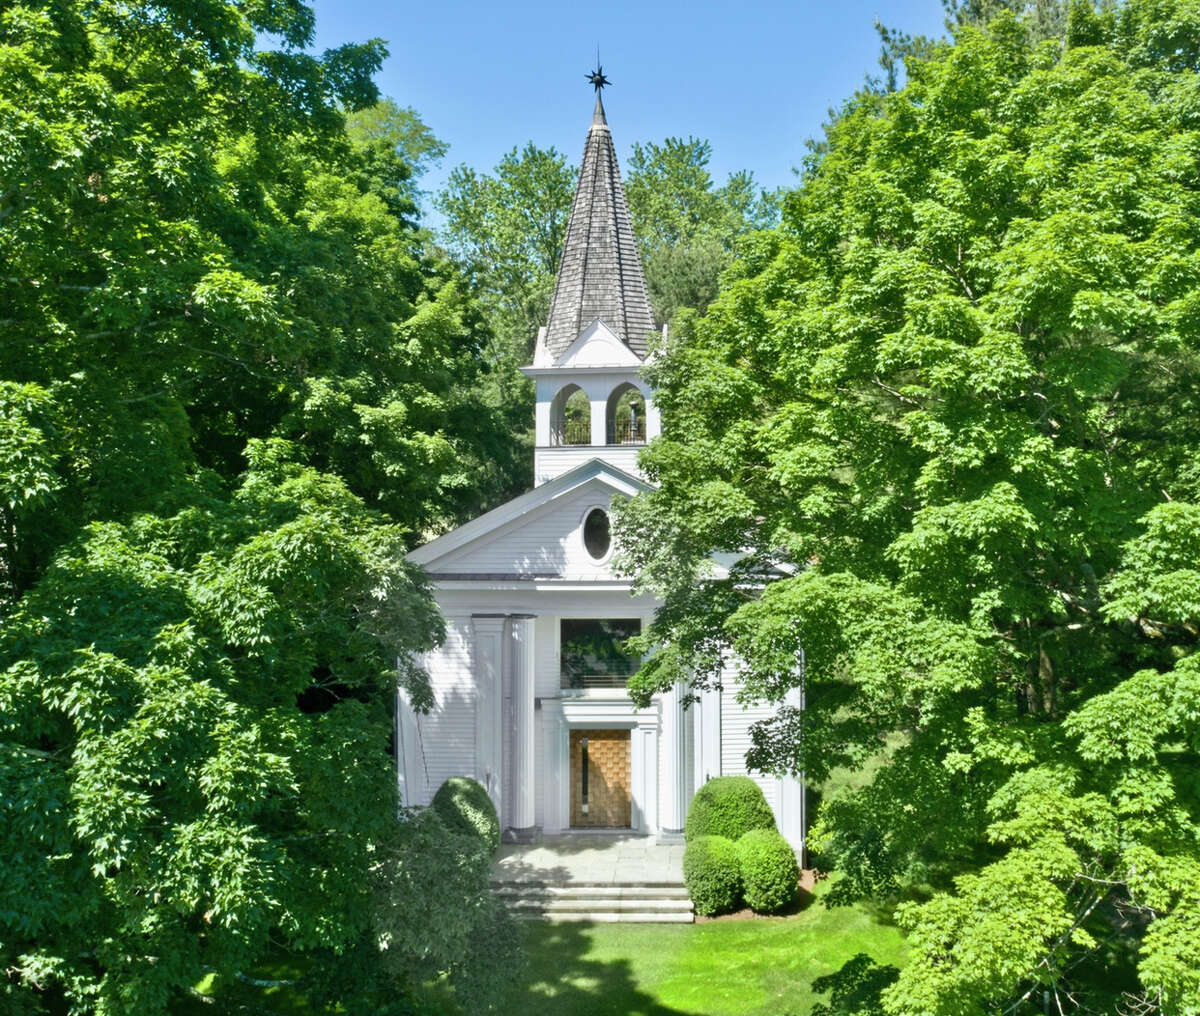 The church on 1035 North Street in Greenwich, Conn. was previously the Banksville Baptist Church. Now, it is a private residence. 